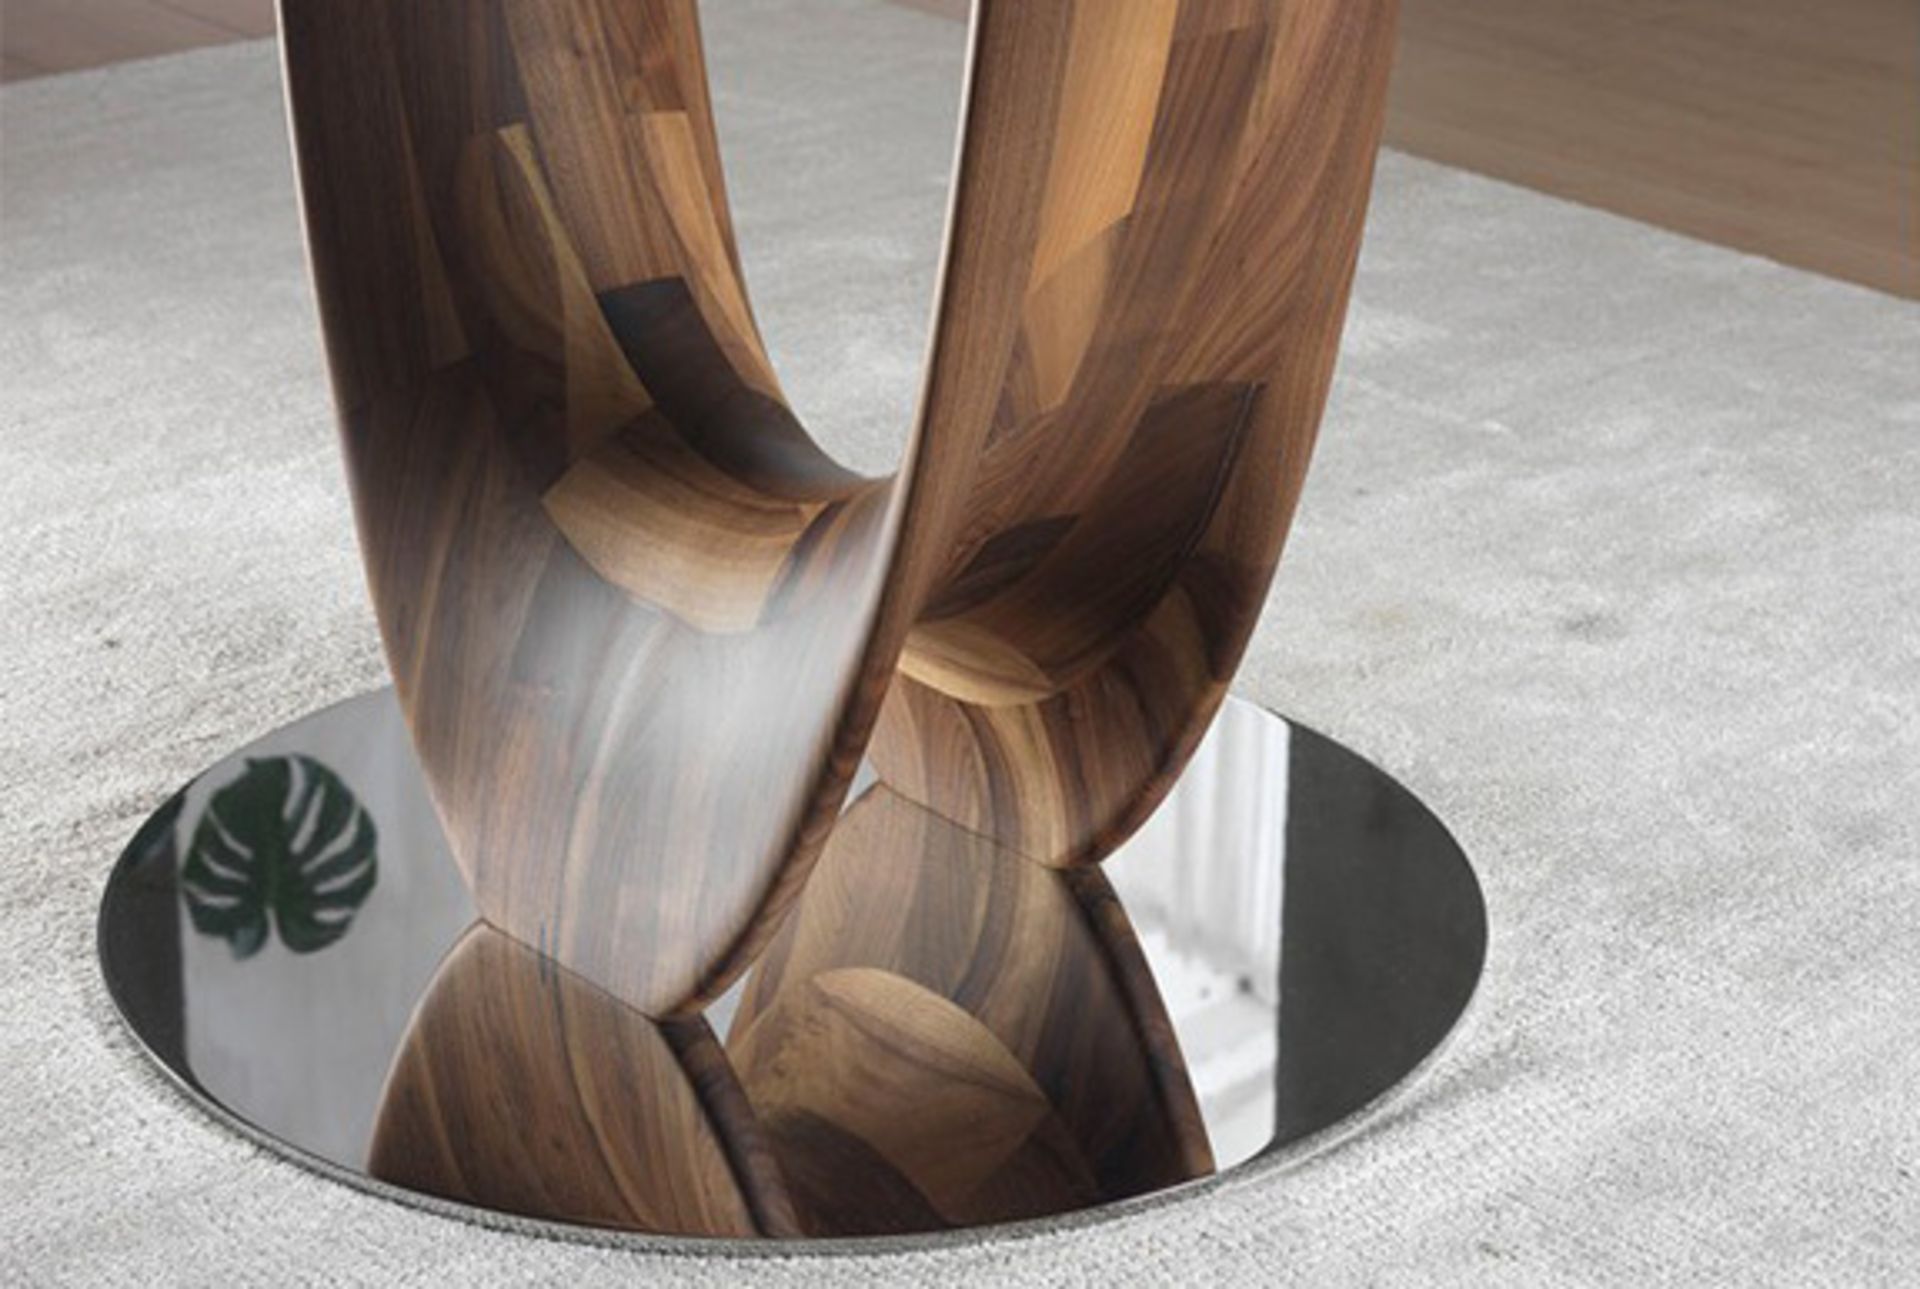 Pacini & Cappellini Table Axis Full Wood - Image 4 of 6